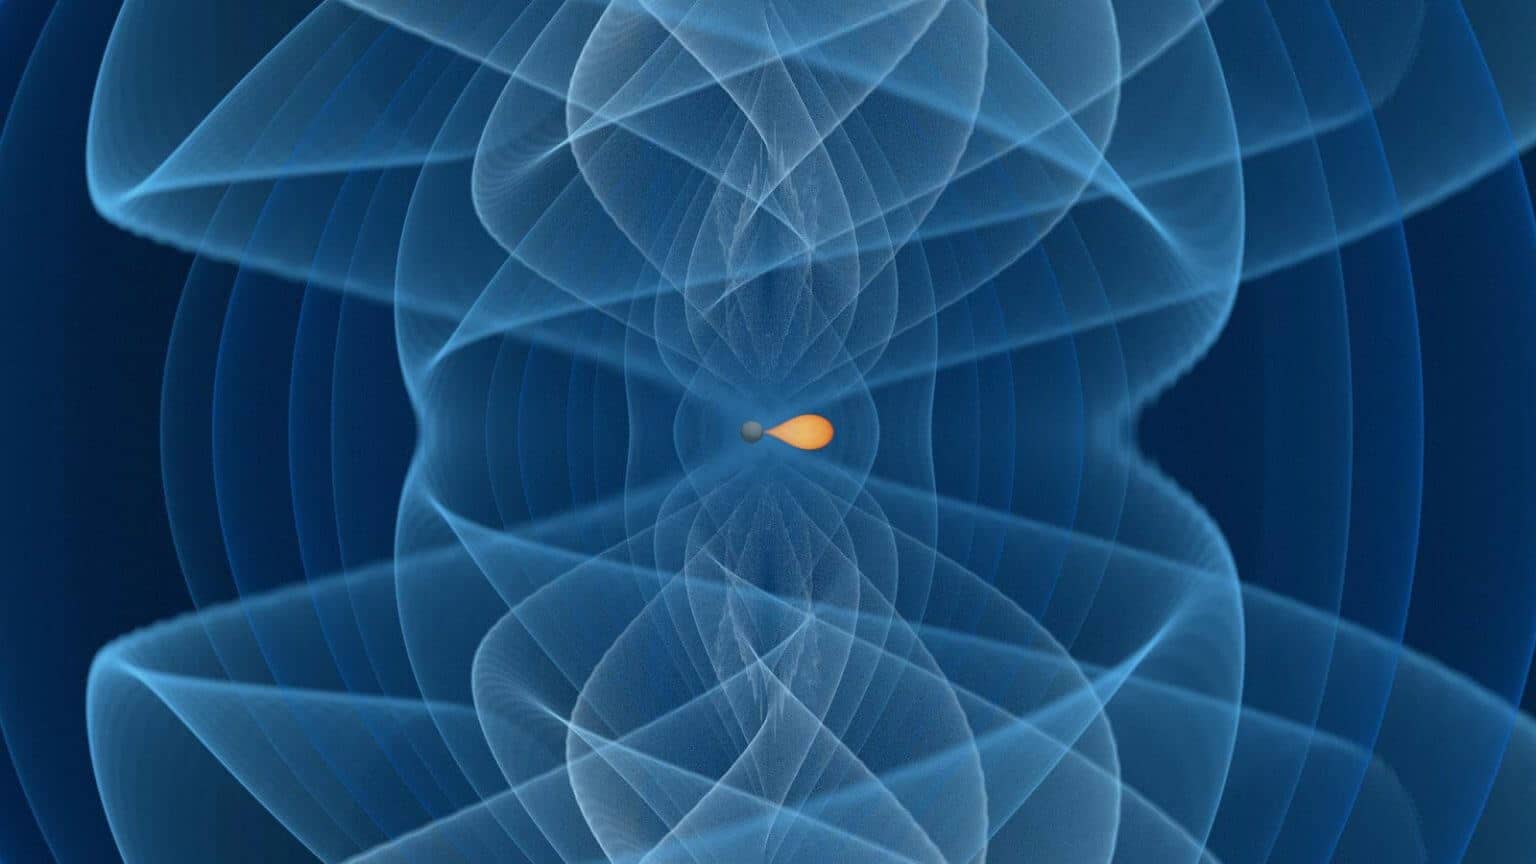 The image shows the merger of a black hole from the bottom of the mass gap (surface in dark gray) with a neutron star with colors ranging from dark orange (million tons per cubic meter) to white (600 million tons per cubic meter). The gravitational wave signal is represented by a series of transitive amplitude values ​​of positive polarization using colors from dark blue to cyan. Credit: I. Markin (Potsdam University), T. Dietrich (Potsdam University and Max Planck Institute for Gravitational Physics), H. Pfeiffer, A. Buonanno (Max Planck Institute for Gravitational Physics)